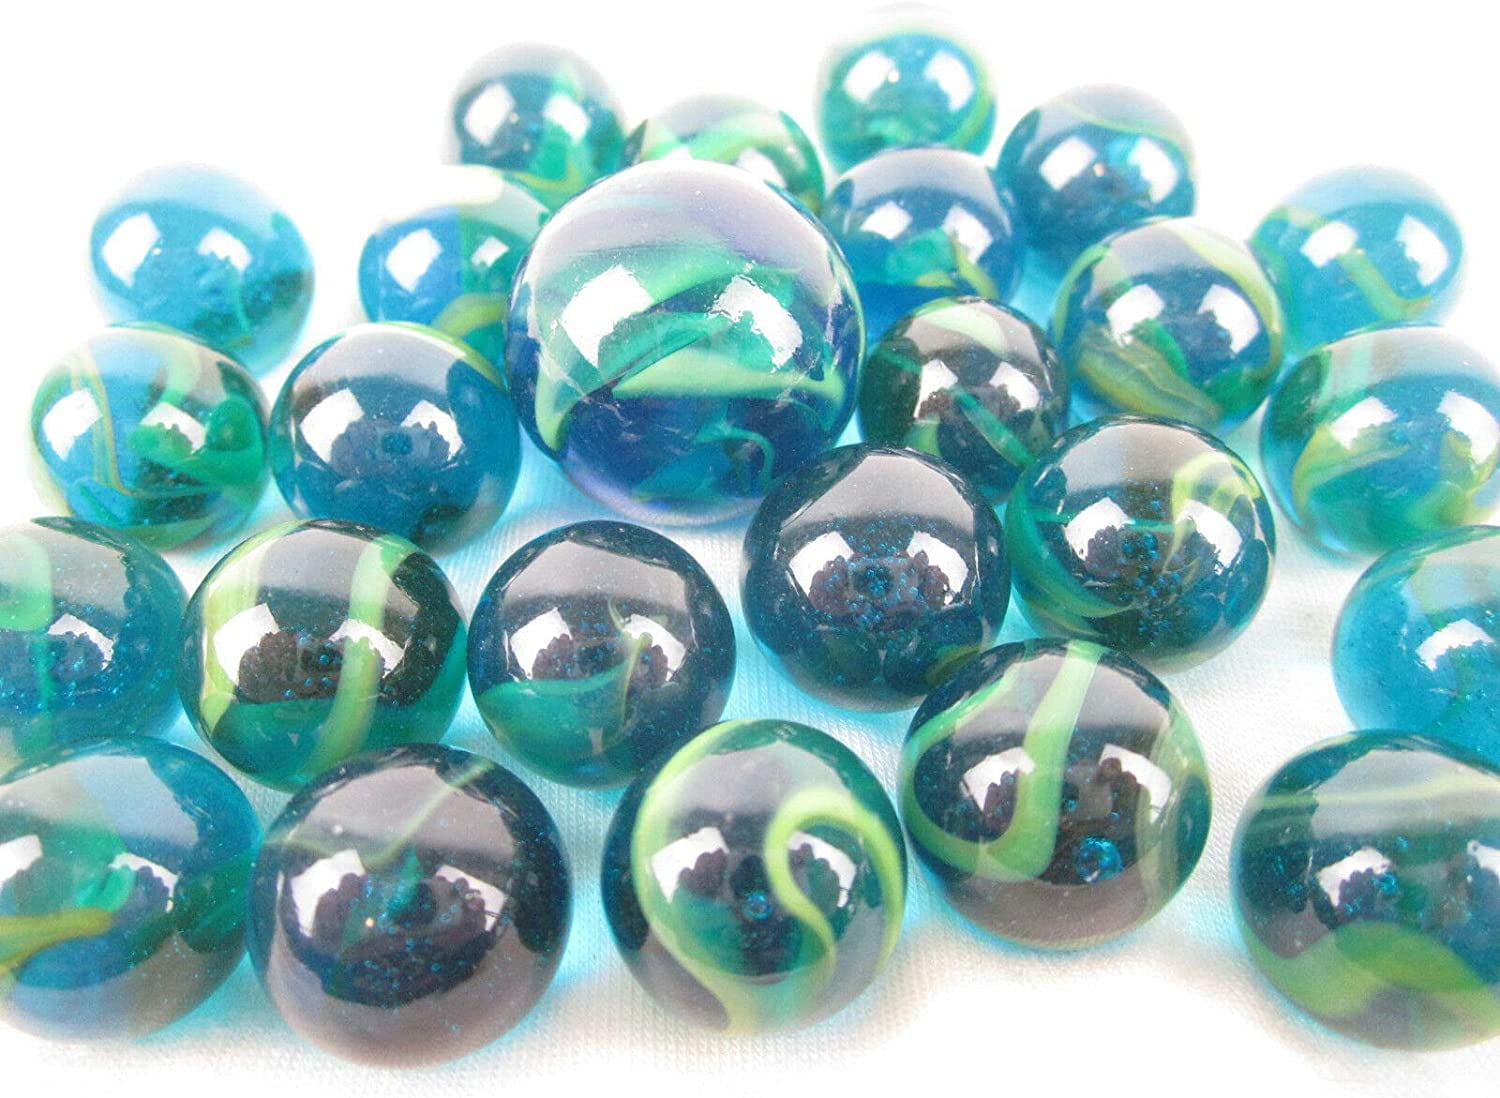 NEW Lot of 10 CLASSIC MARBLES Boulder Shooter glass swirl MEGA BIRTHDAY Free shp 